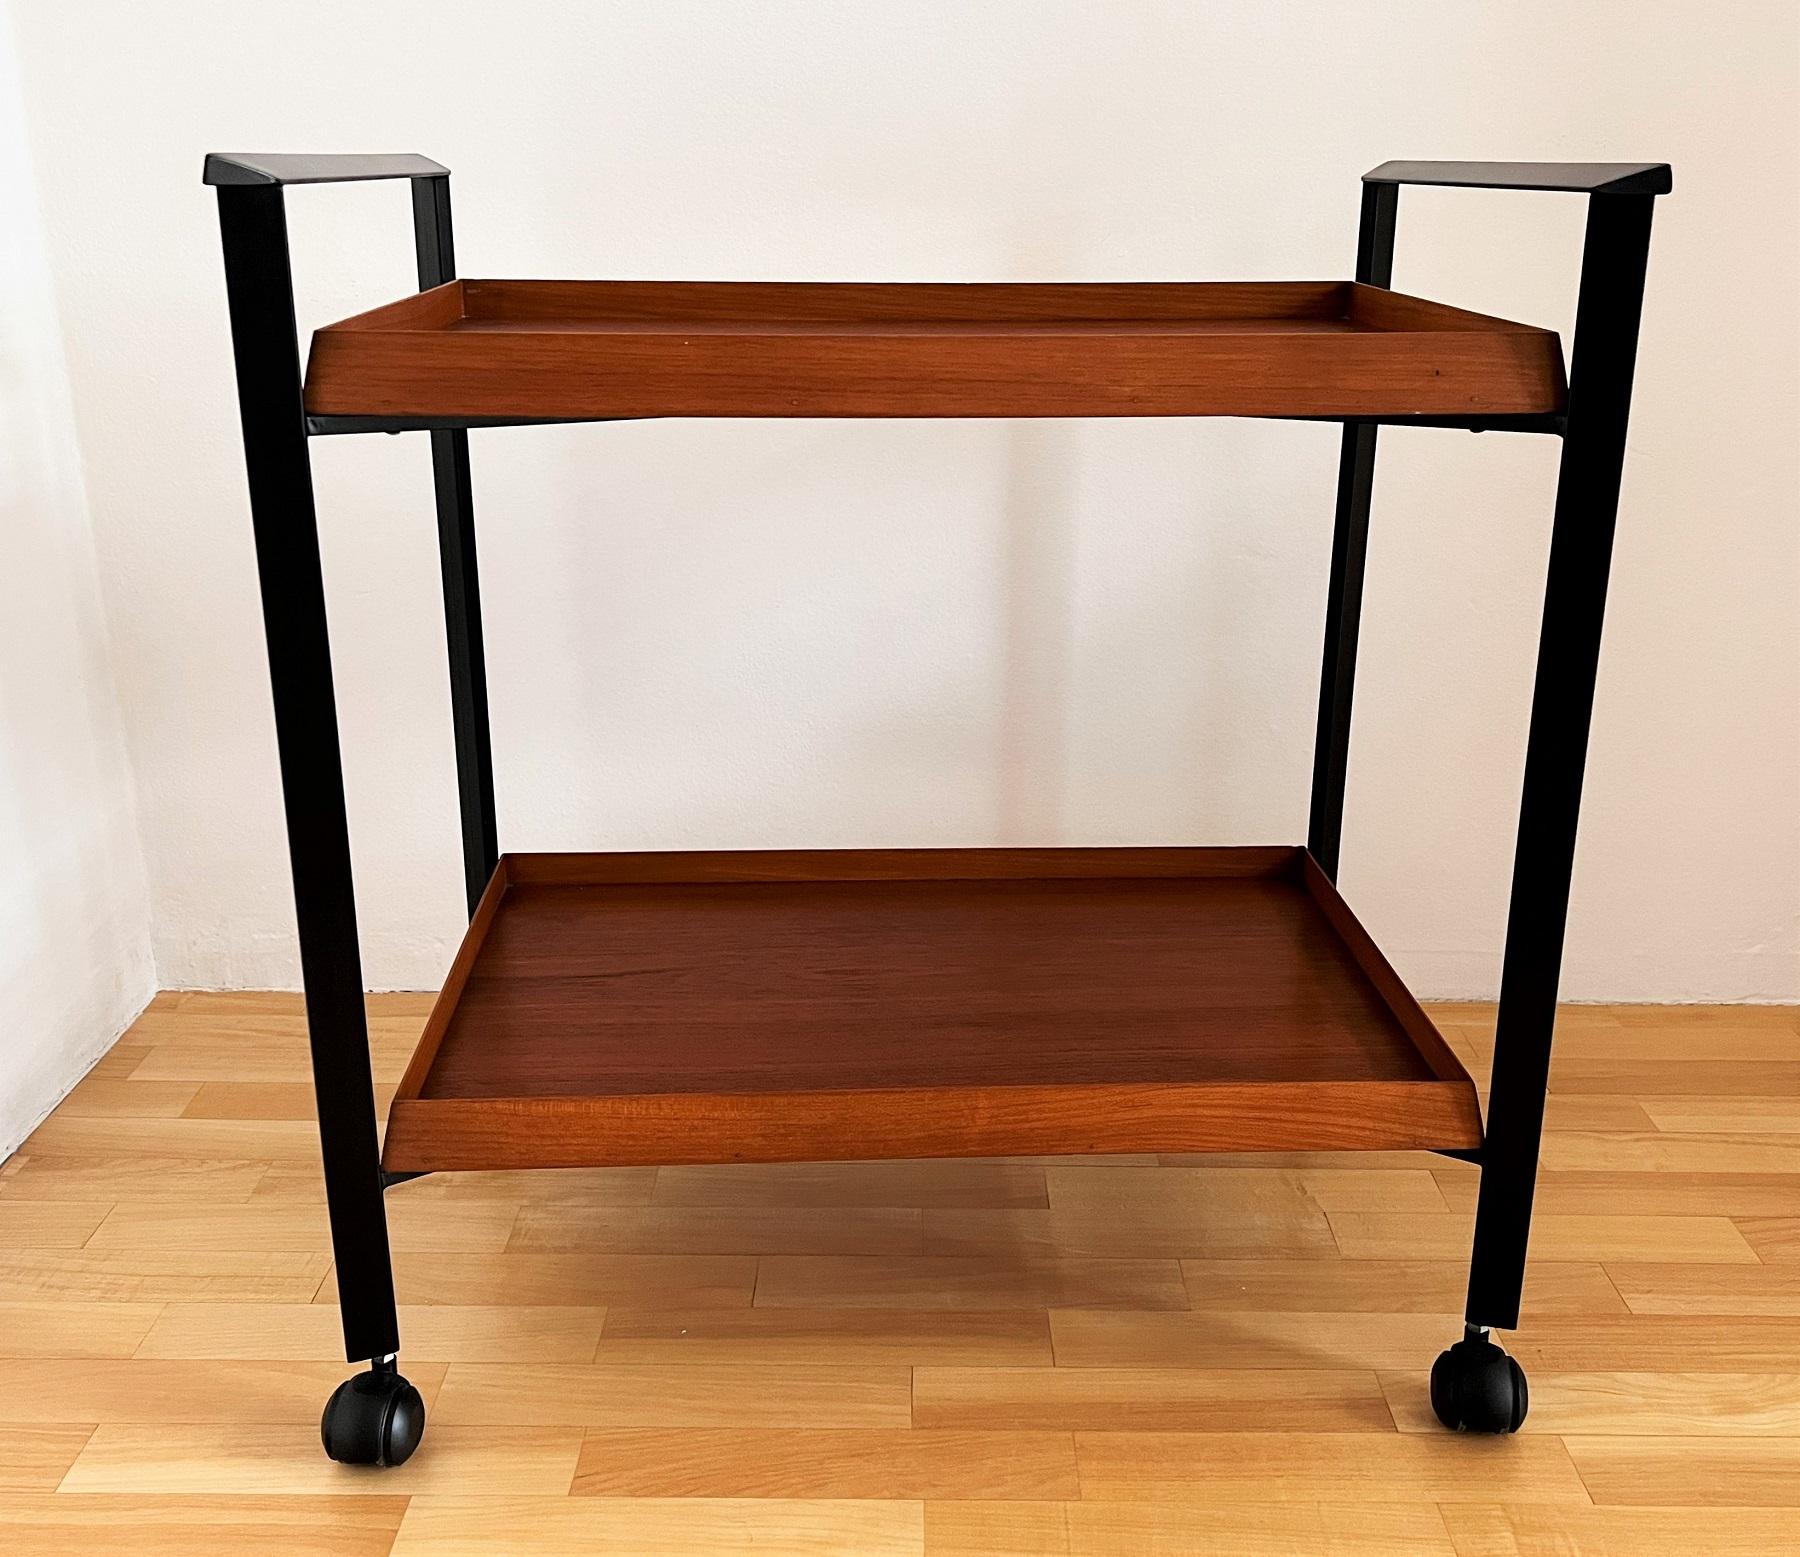 Italian Midcentury Serving Bar Cart or Trolley with Teak Trays, 1970s For Sale 5